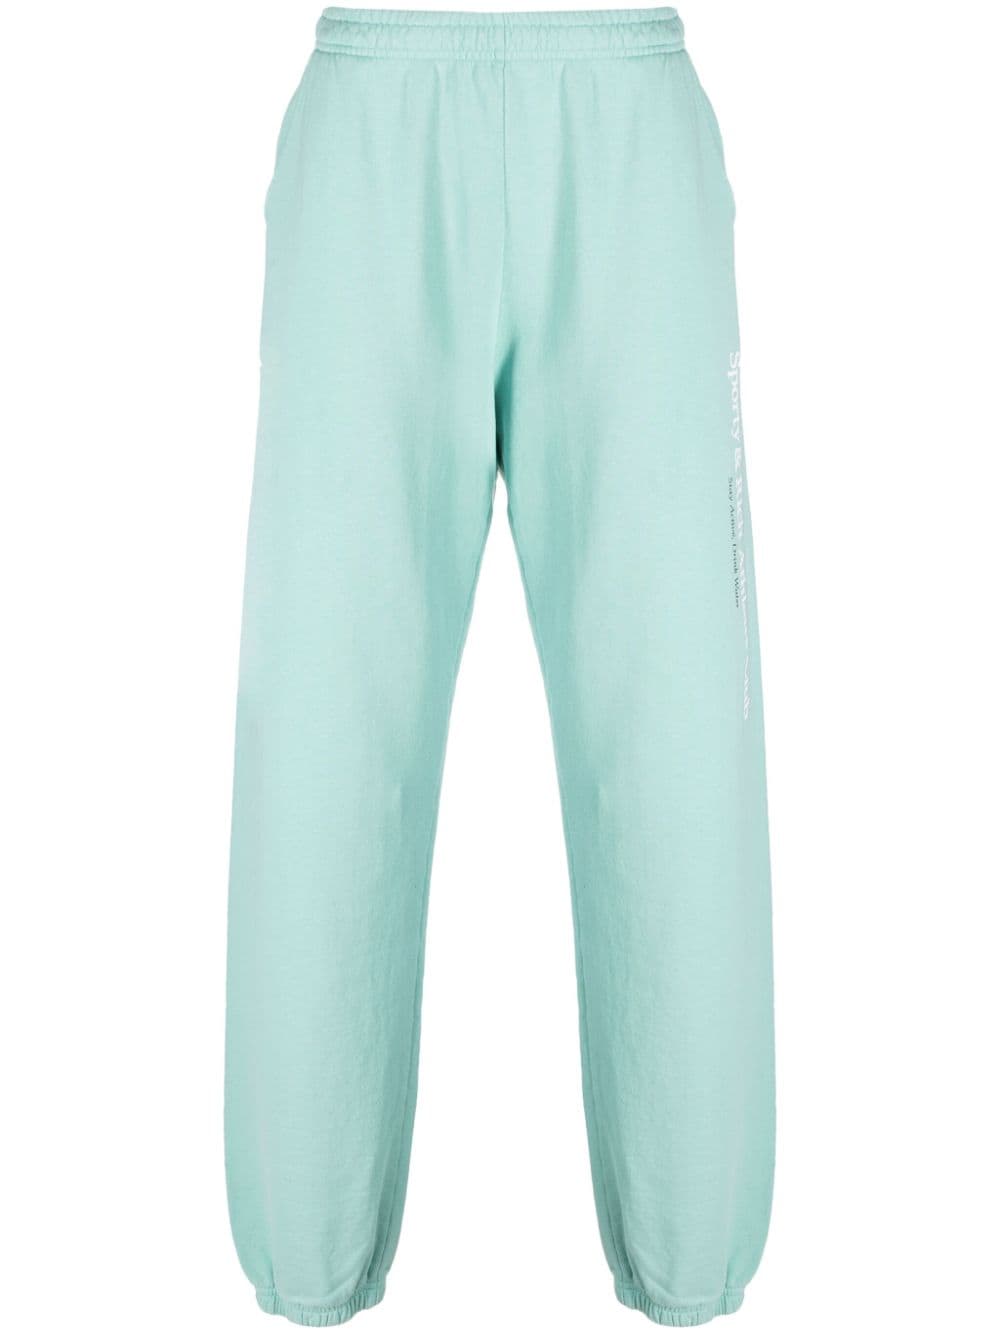 Sporty And Rich Blue Athletic Club Sweatpants